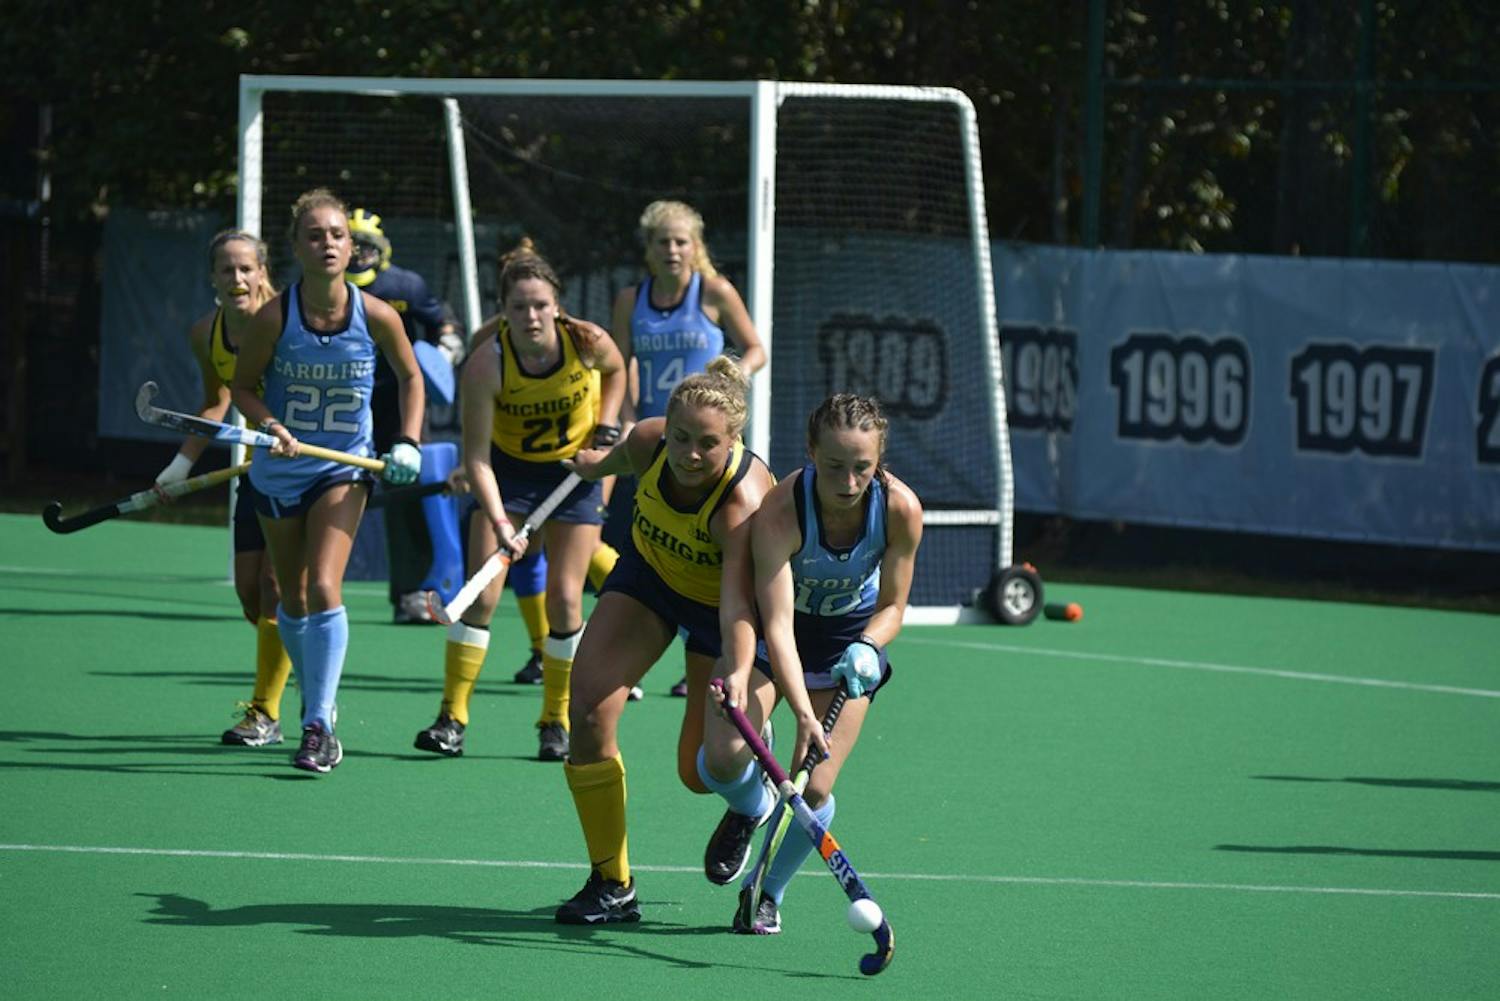 Eef Andriessen, First-year UNC Forward, fights for possession of the ball during the Tar Heels' Sunday victory over Michigan. The final score was 5-1.